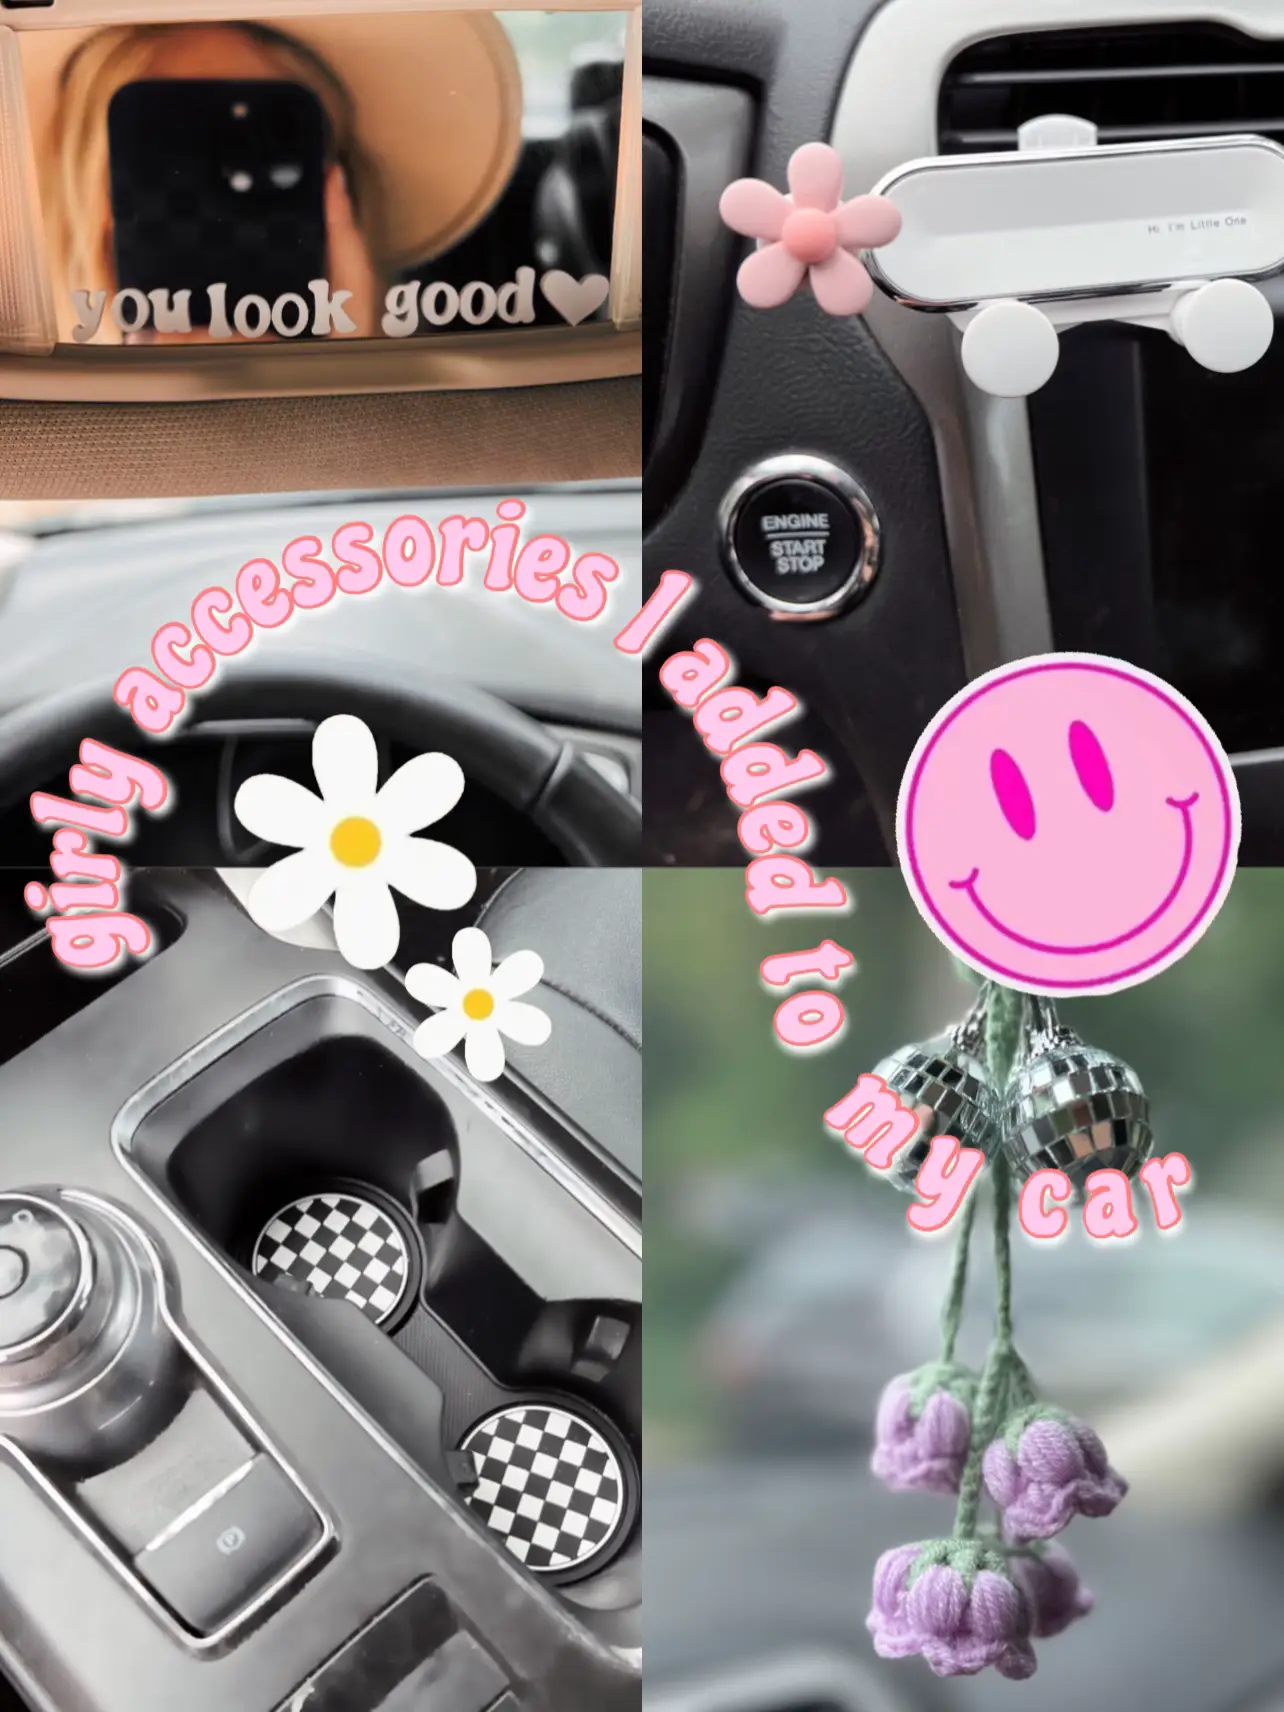 Cool stickers for car and wall - Lemon8 Search